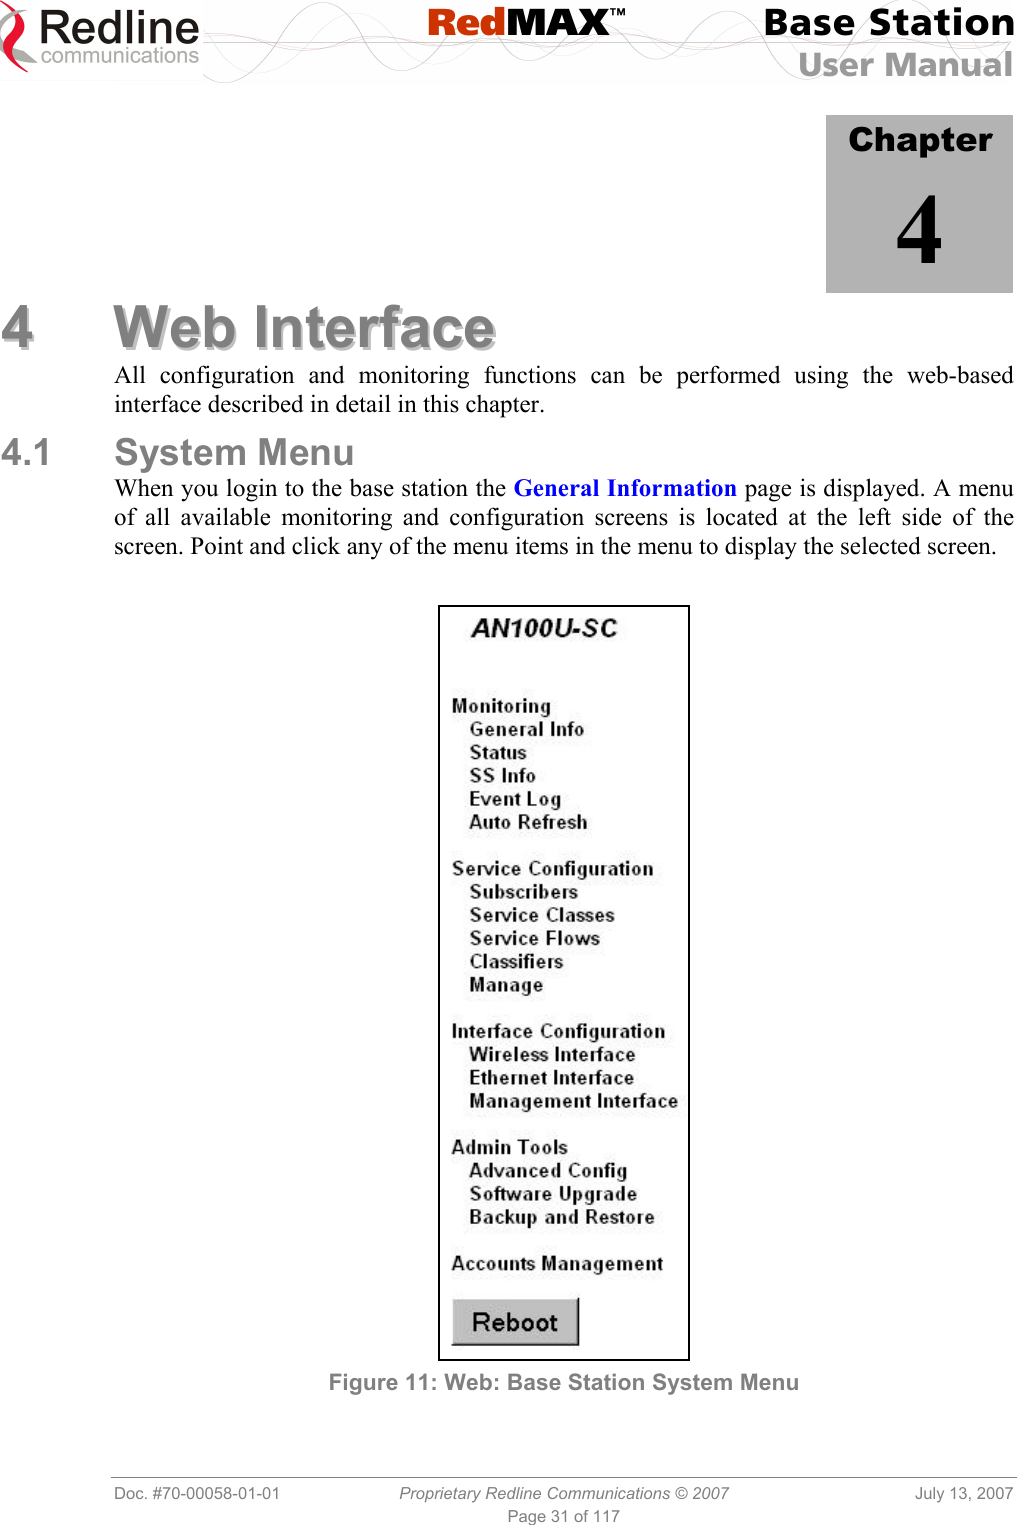  RedMAX™ Base Station User Manual   Doc. #70-00058-01-01  Proprietary Redline Communications © 2007  July 13, 2007 Page 31 of 117            Chapter 4 44  WWeebb  IInntteerrffaaccee  All configuration and monitoring functions can be performed using the web-based interface described in detail in this chapter. 4.1 System Menu When you login to the base station the General Information page is displayed. A menu of all available monitoring and configuration screens is located at the left side of the screen. Point and click any of the menu items in the menu to display the selected screen.   Figure 11: Web: Base Station System Menu 